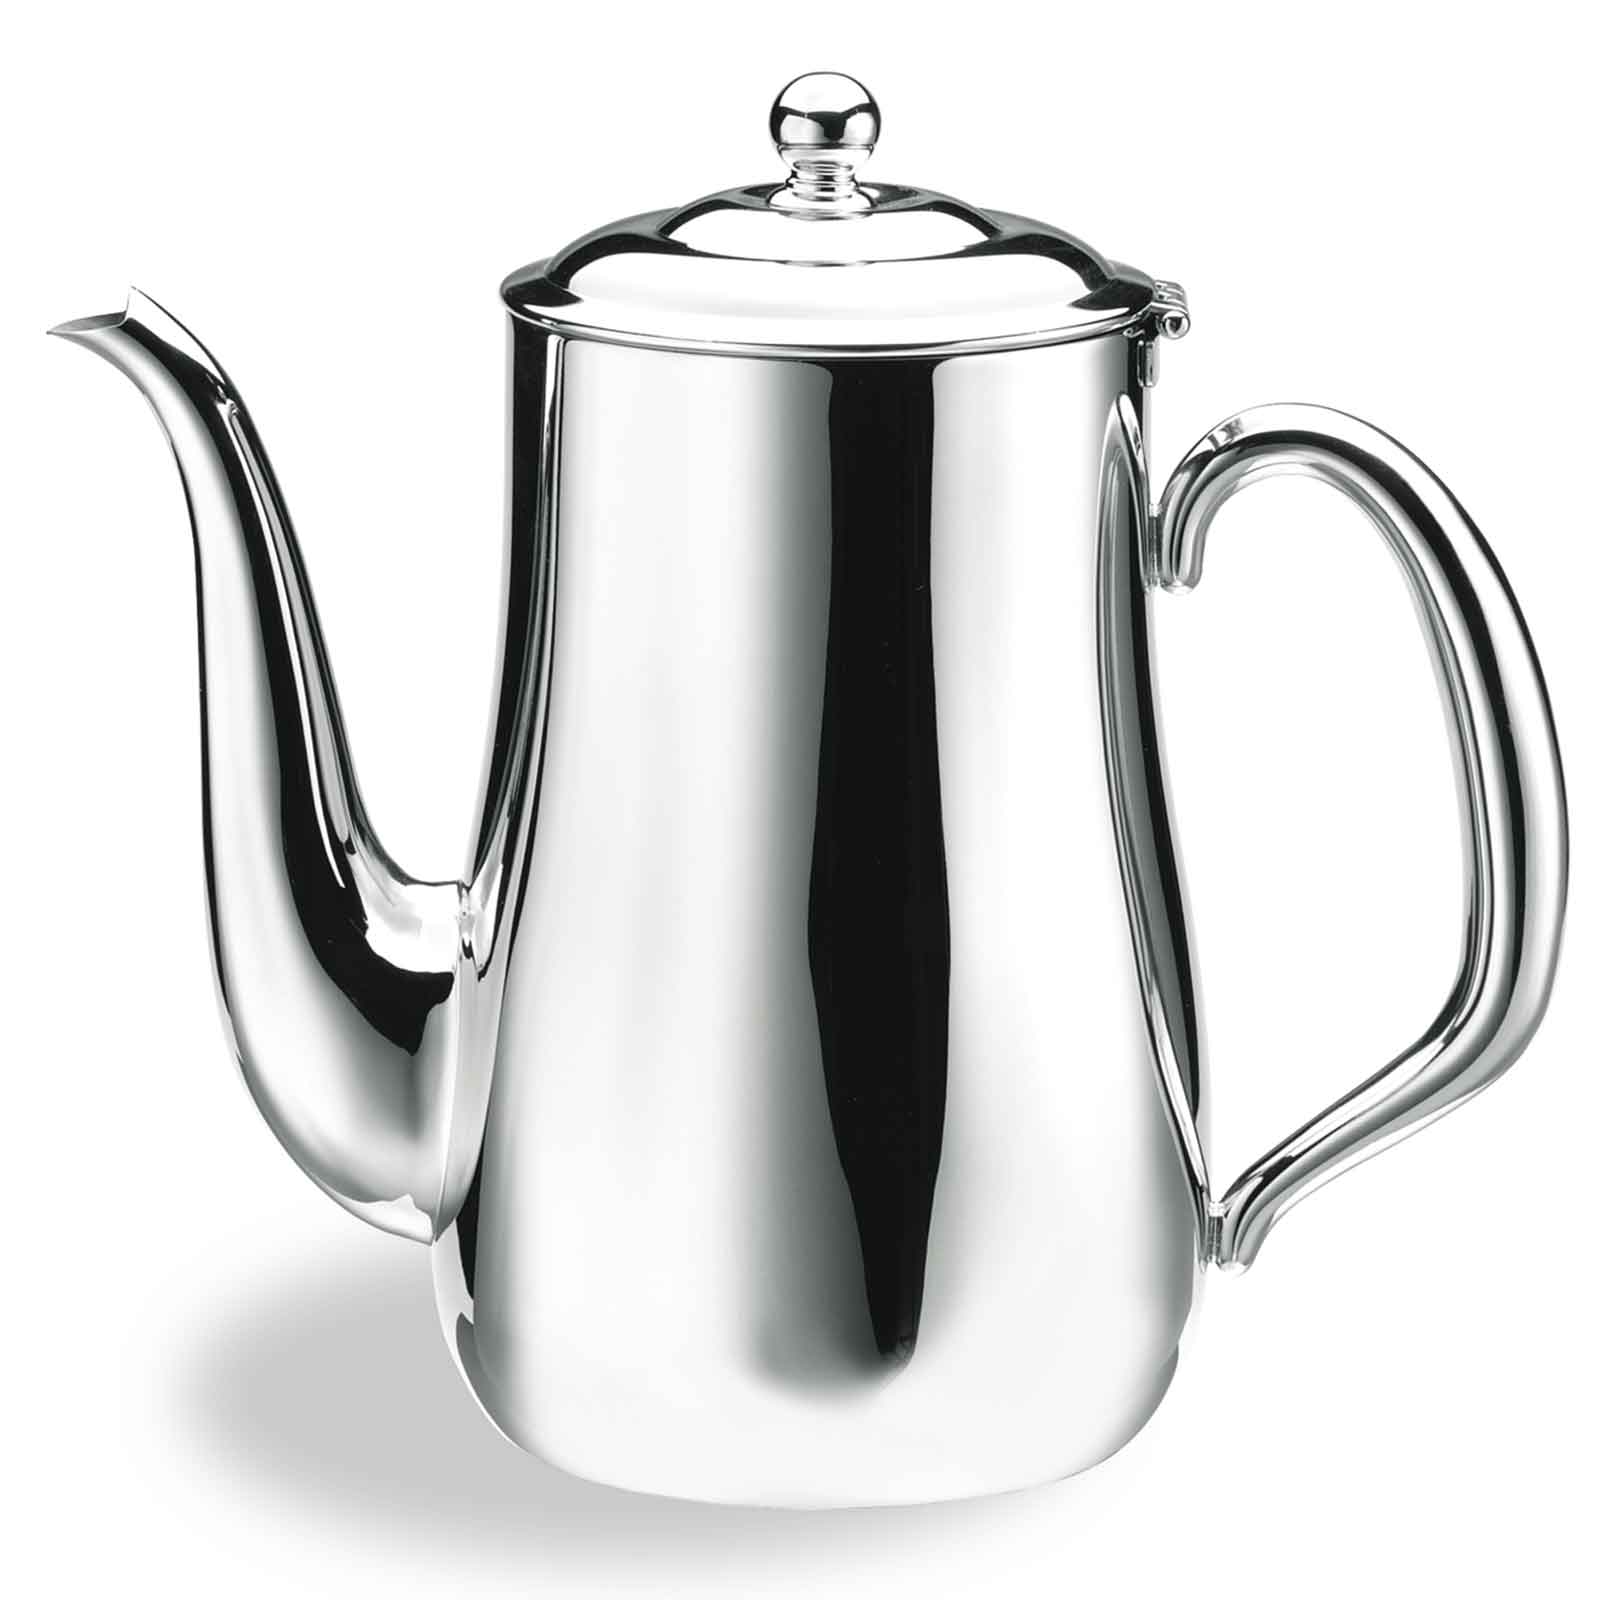 Walco Stainless CX514 Coffee Pot/Teapot, Stainless Steel, Holloware